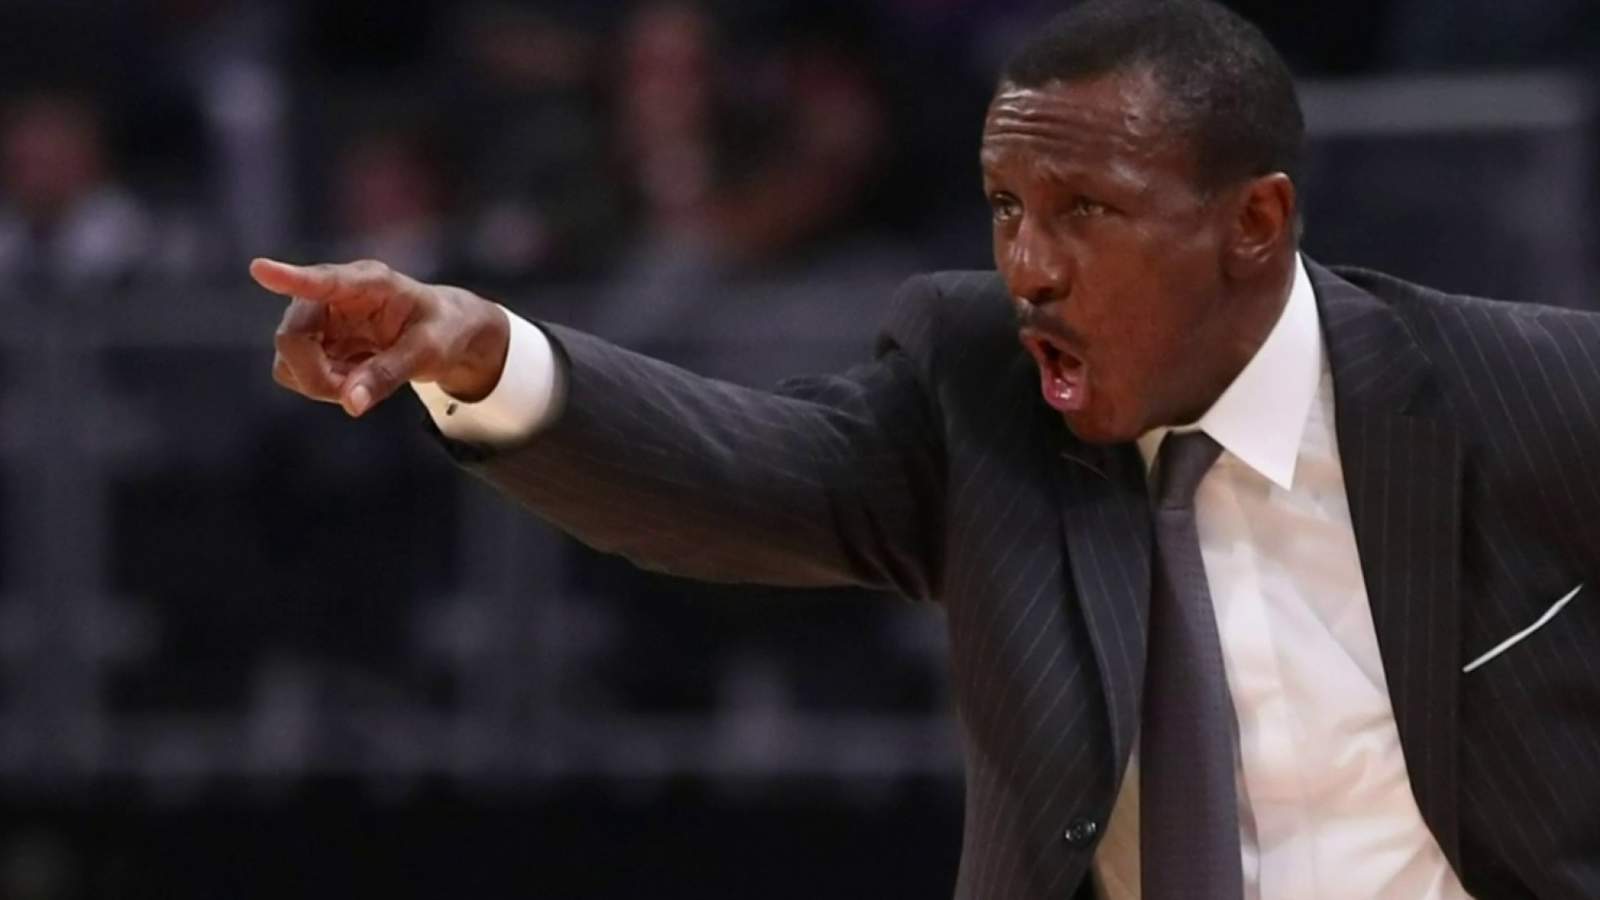 Benched: Dwayne Casey on the NBA shutdown, his young players and home schooling